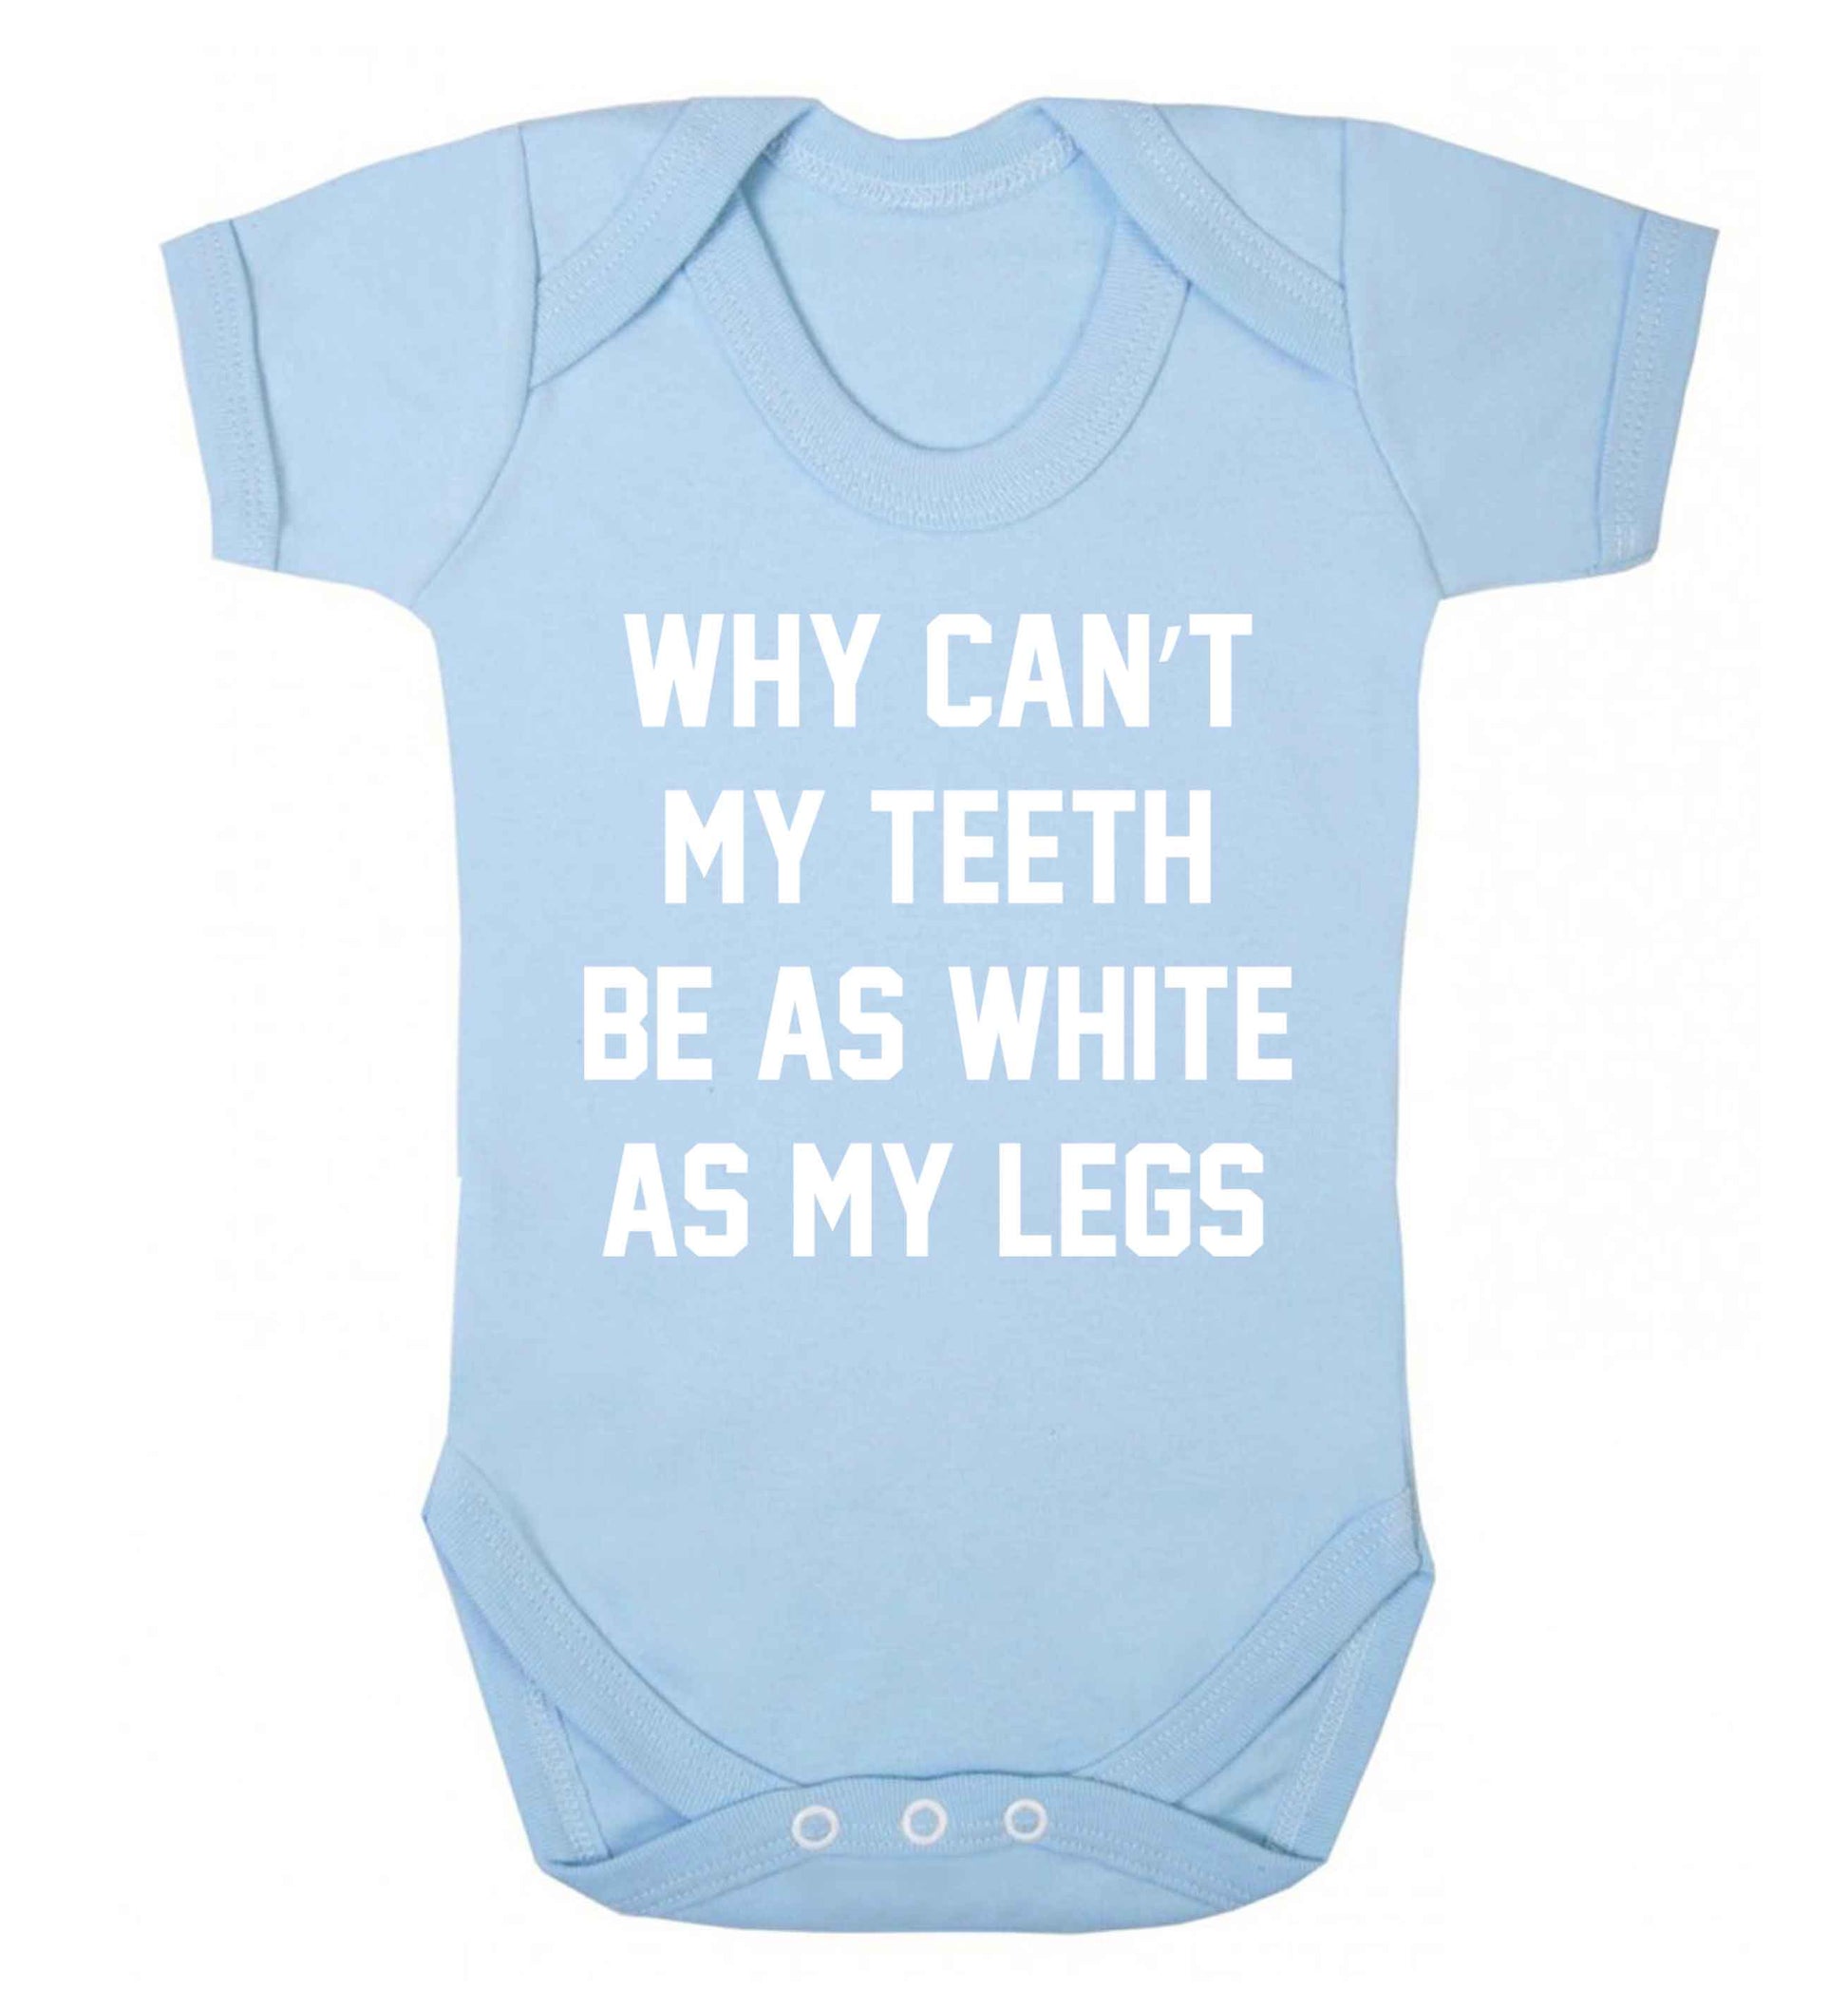 Why can't my teeth be as white as my legs Baby Vest pale blue 18-24 months